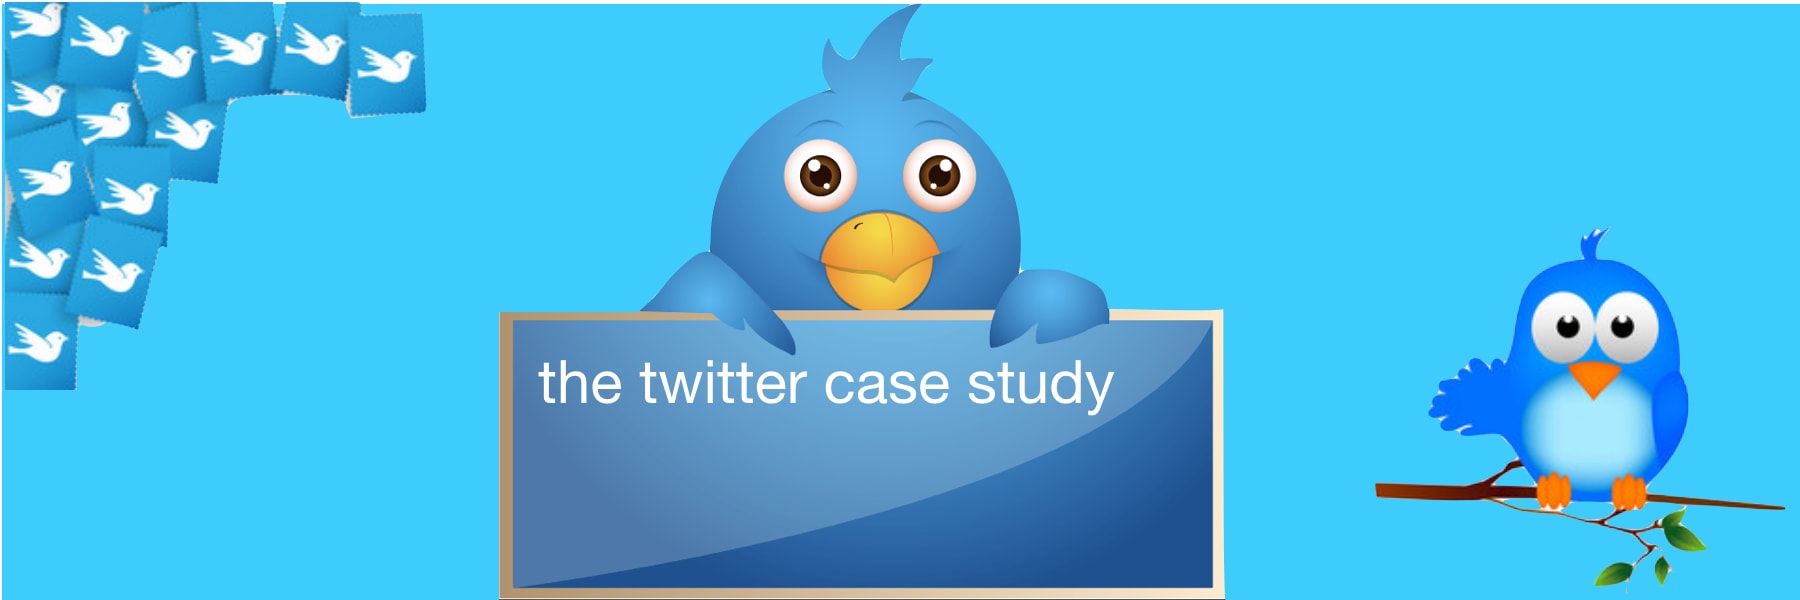 The Twitter Case Study